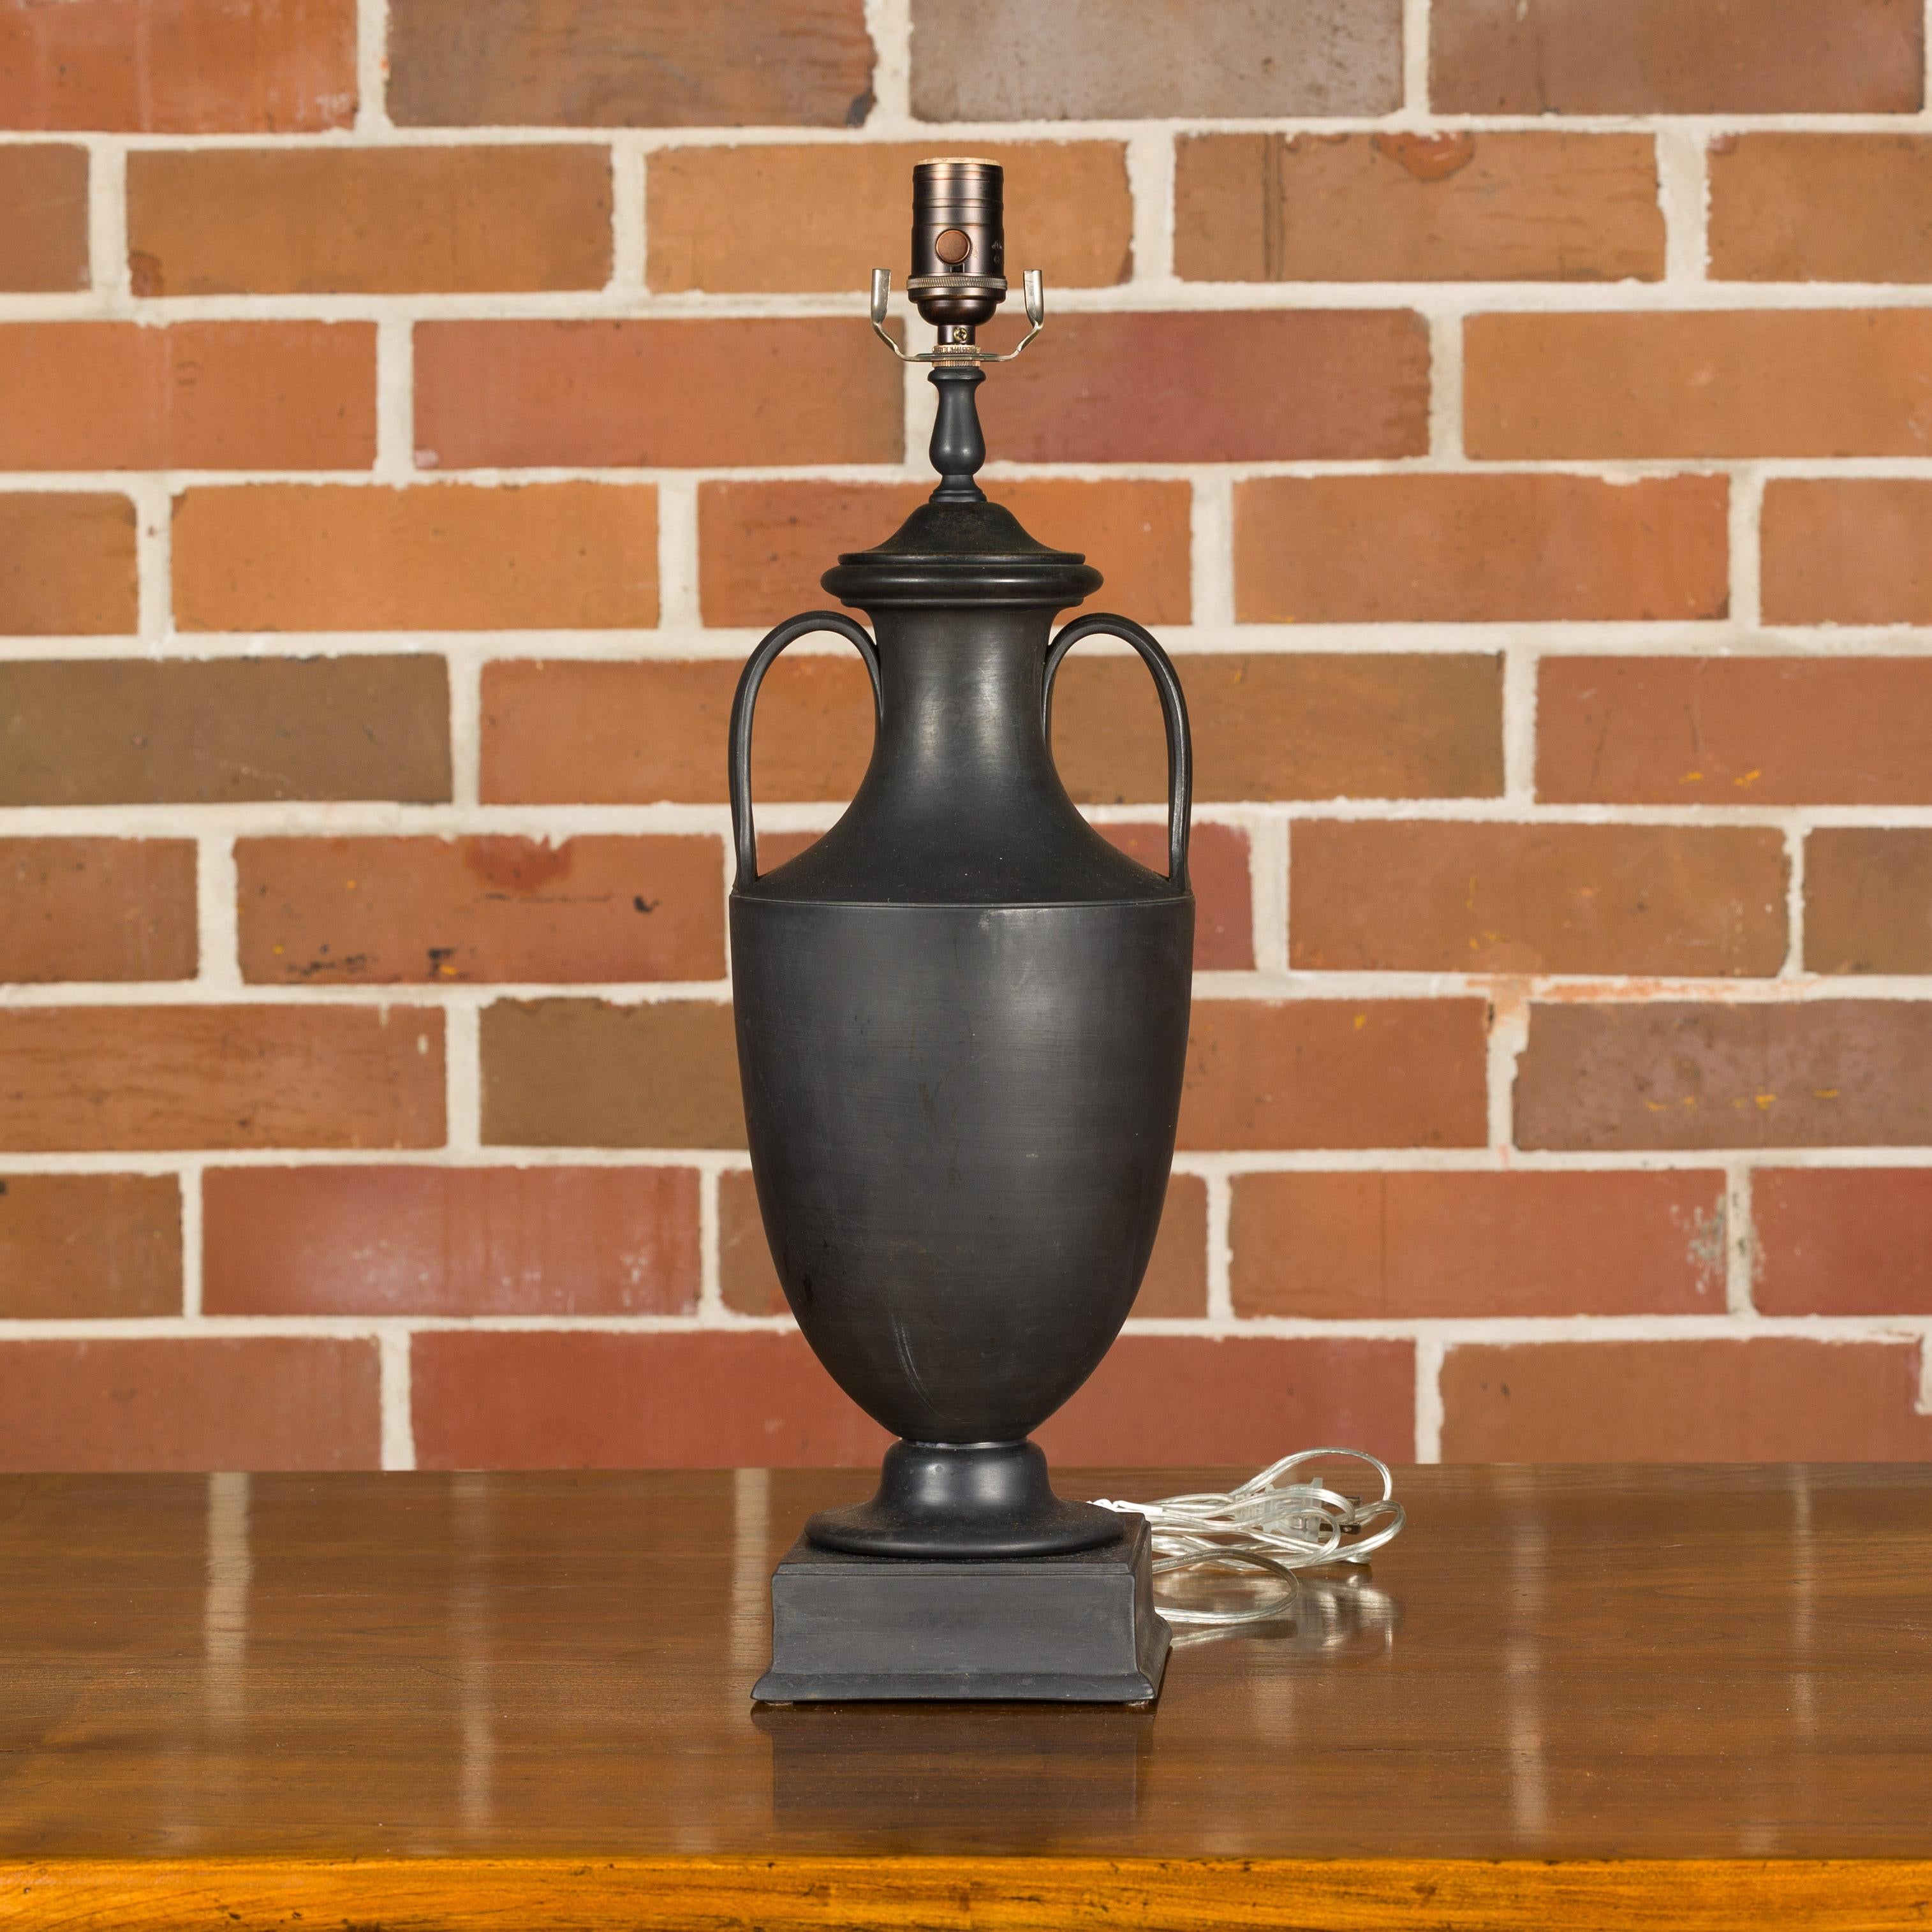 A Wedgwood basalt amphora from the 19th century made into a single socket table lamp, wired for the USA. This exquisite 19th-century Wedgwood basalt amphora has been masterfully transformed into a sophisticated single socket table lamp, elegantly